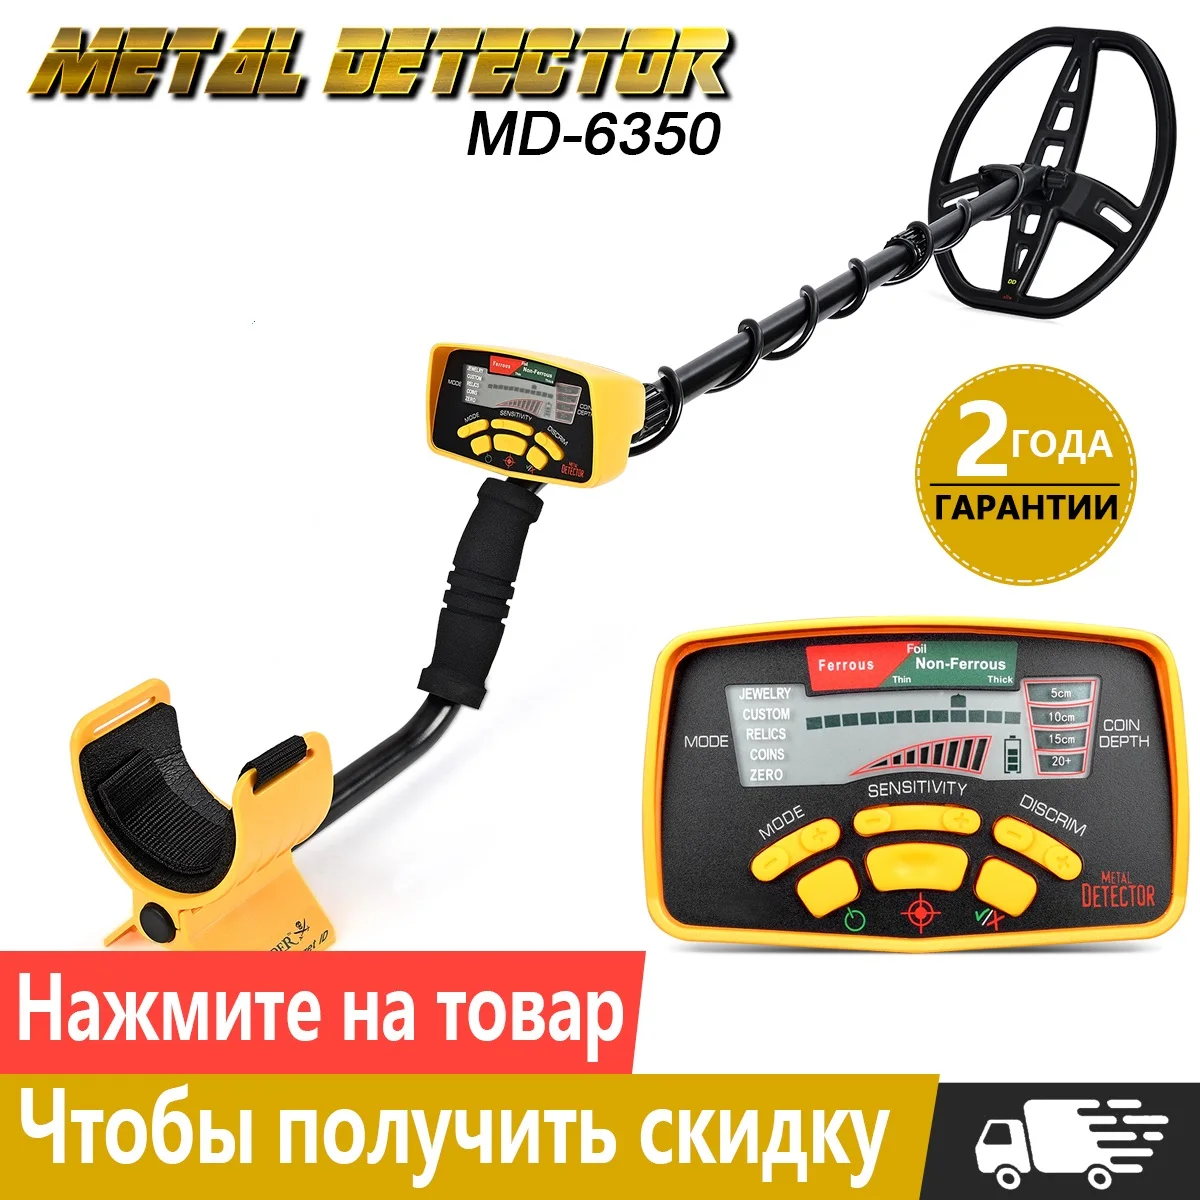 

Underground Metal Detector Professional MD6350 Gold Digger Treasure Hunter MD6250 Updated MD-6350 Pinpointer LCD Display